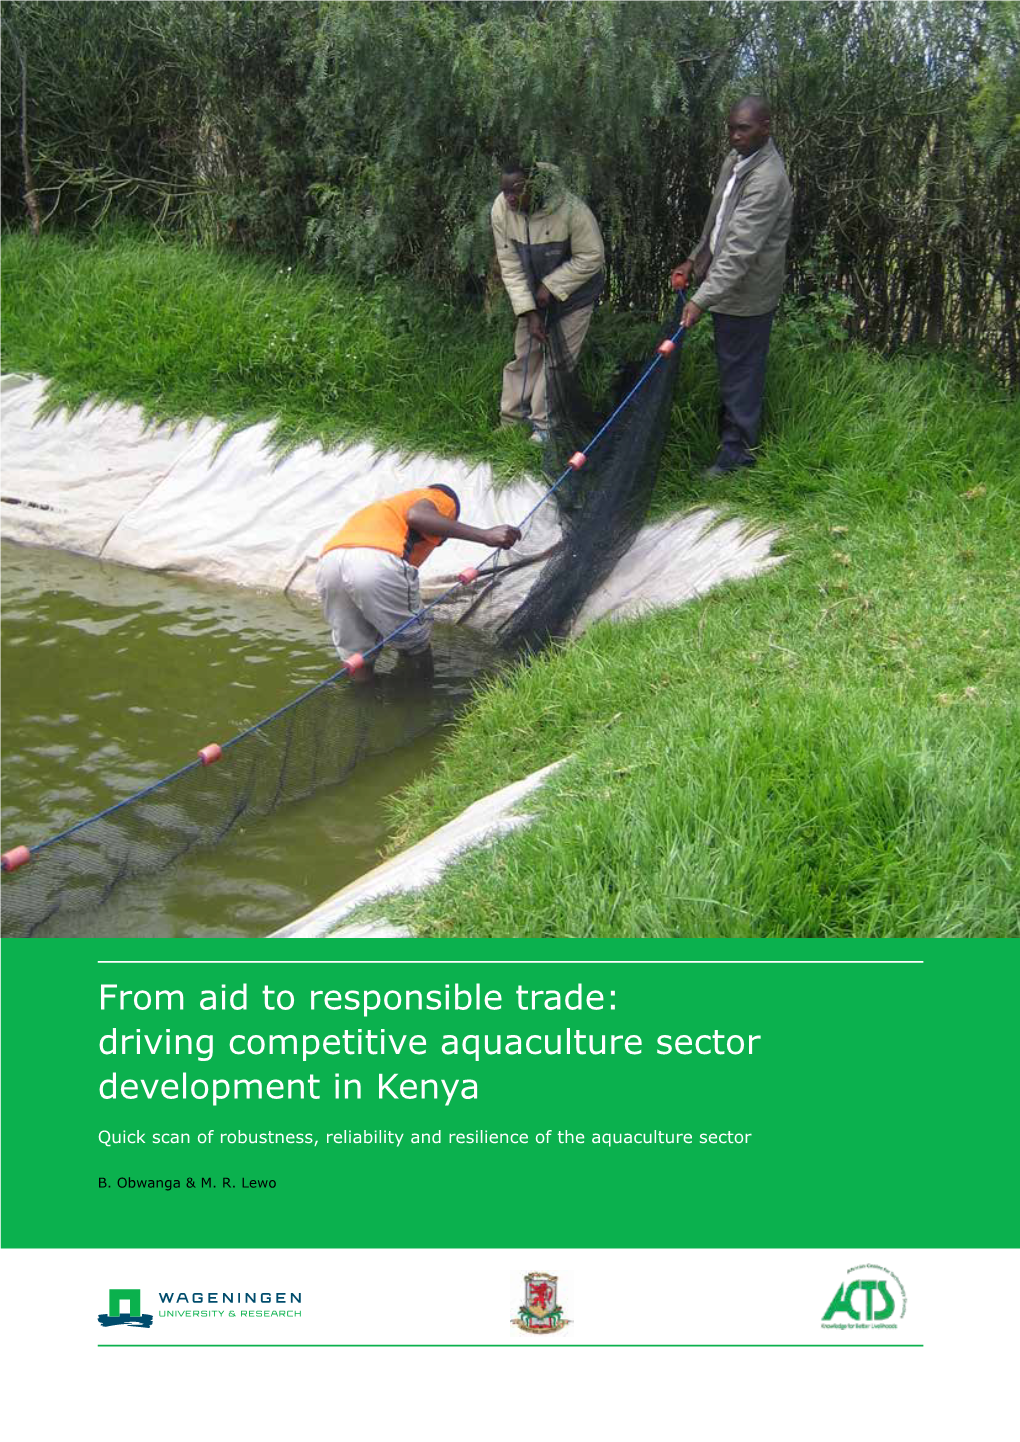 From Aid to Responsible Trade: Driving Competitive Aquaculture Sector Development in Kenya